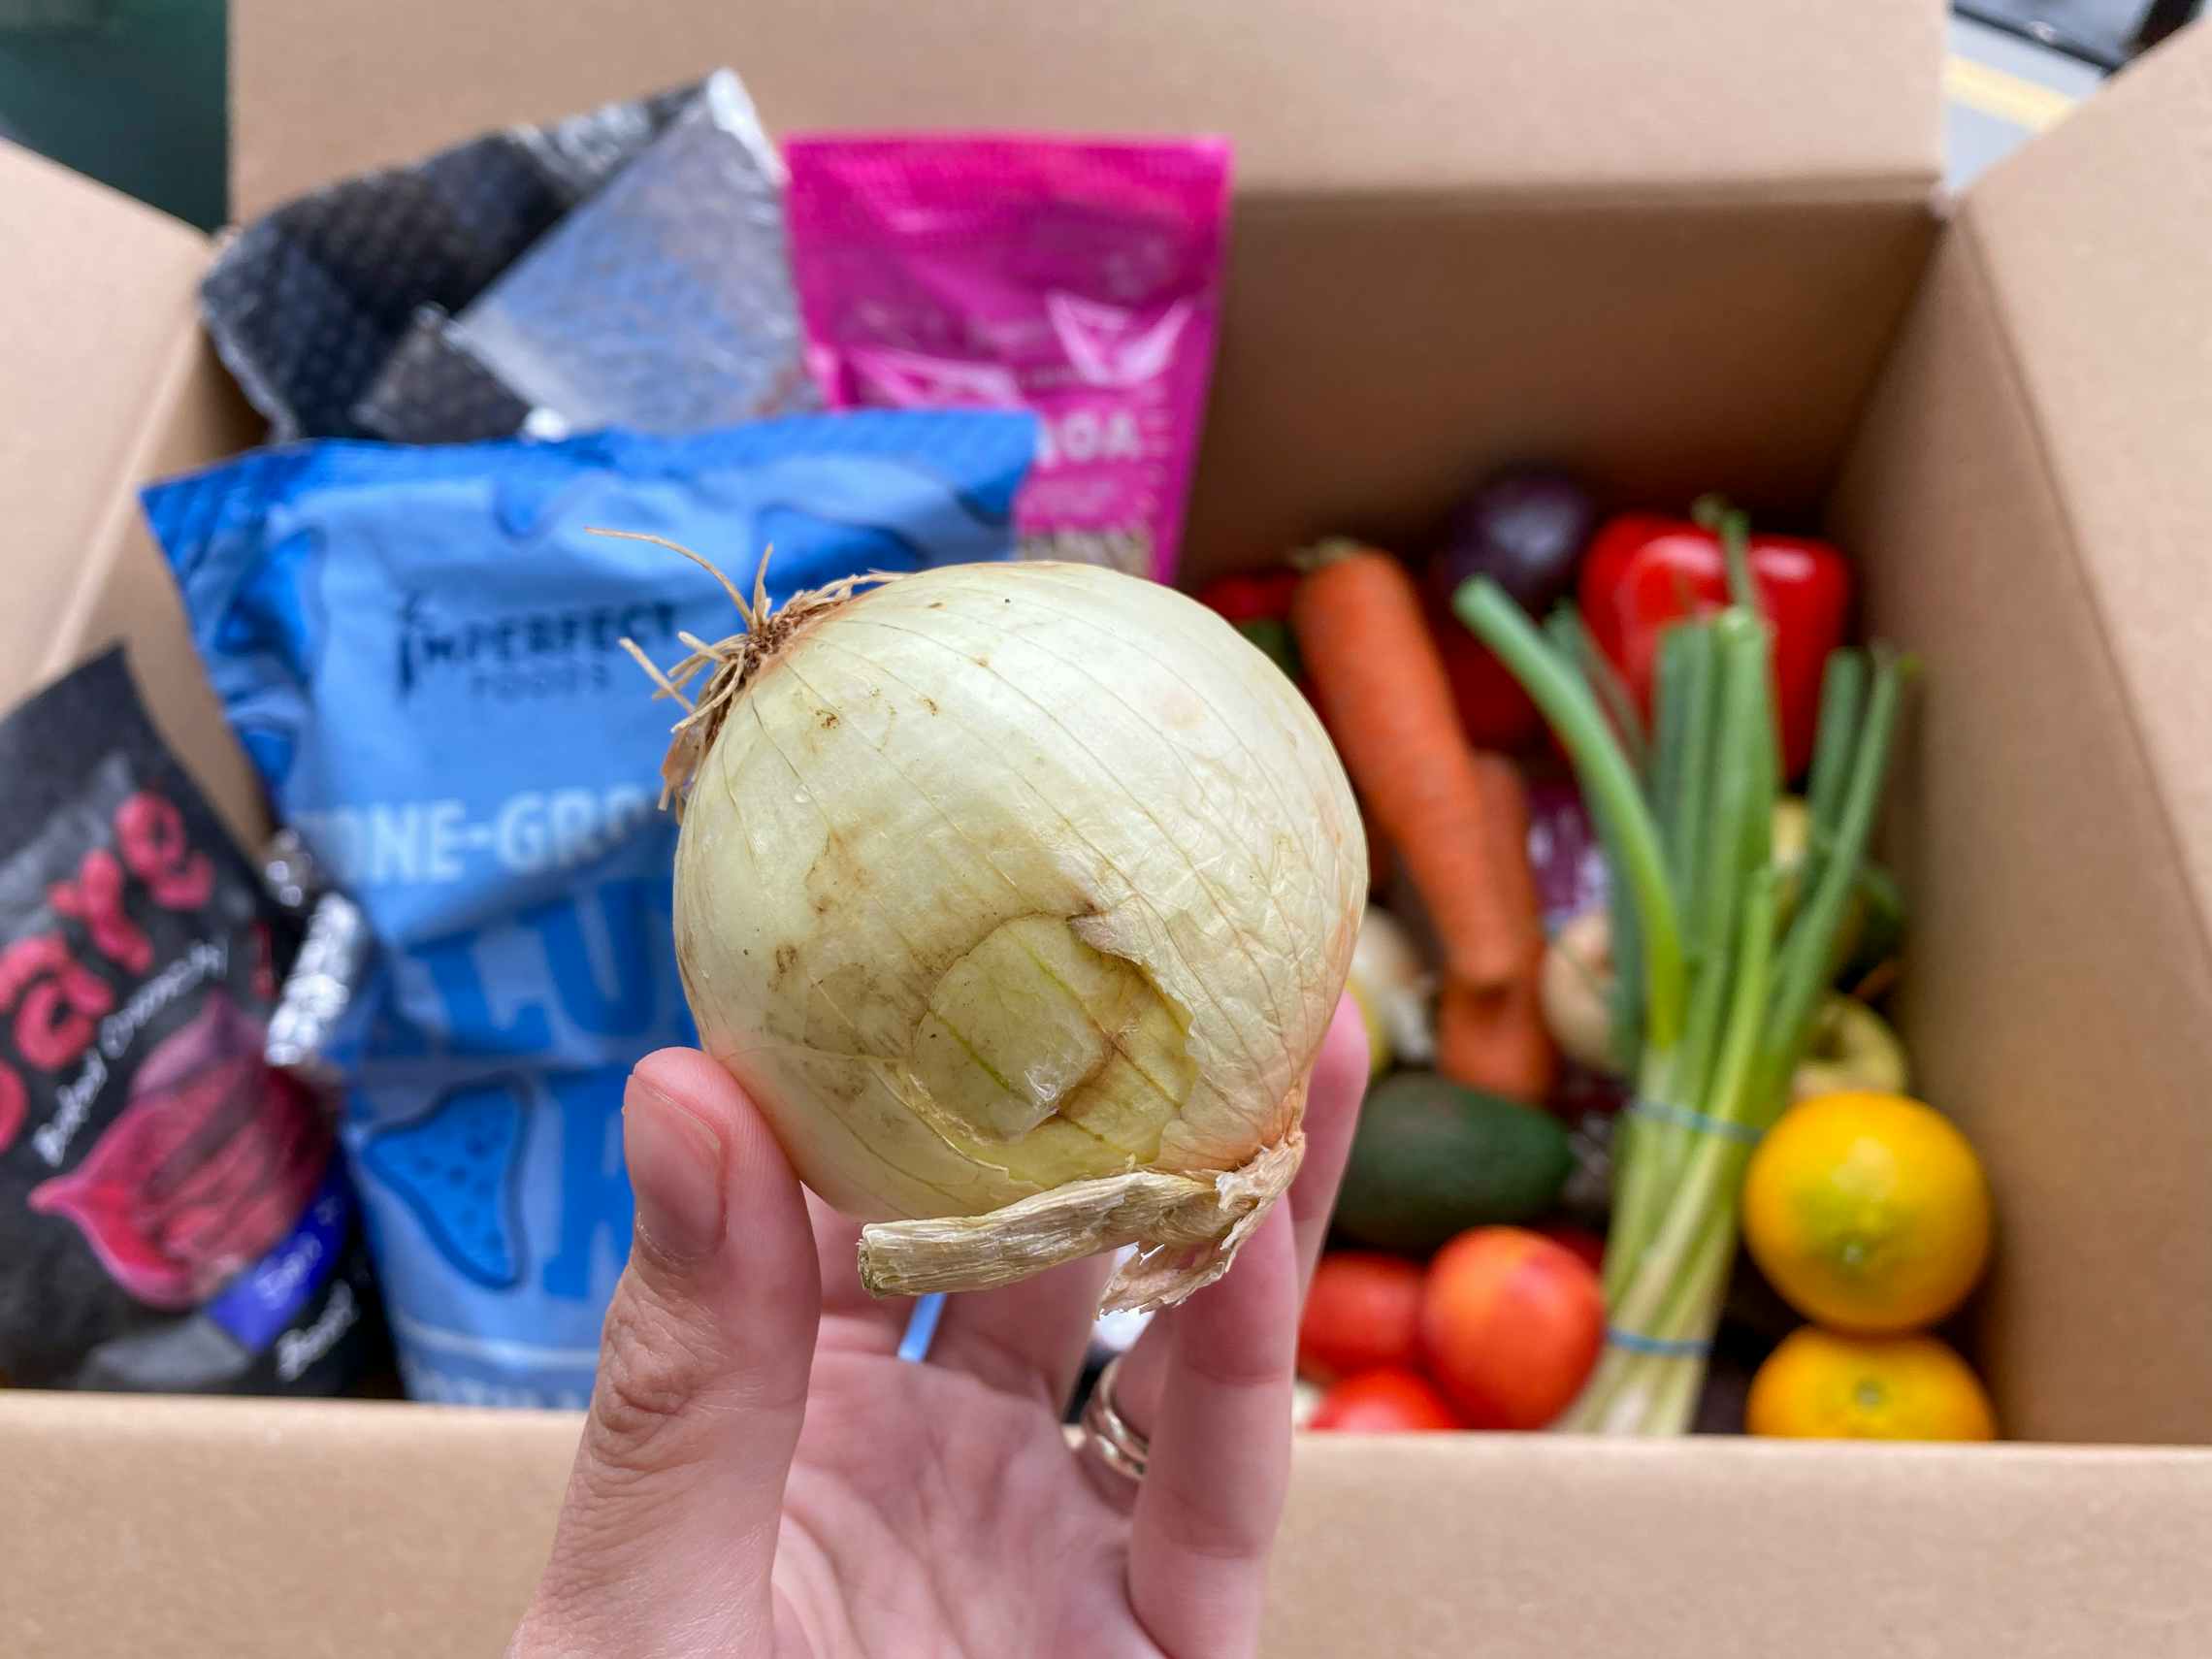 An onion that is blemished from an Imperfect foods grocery box